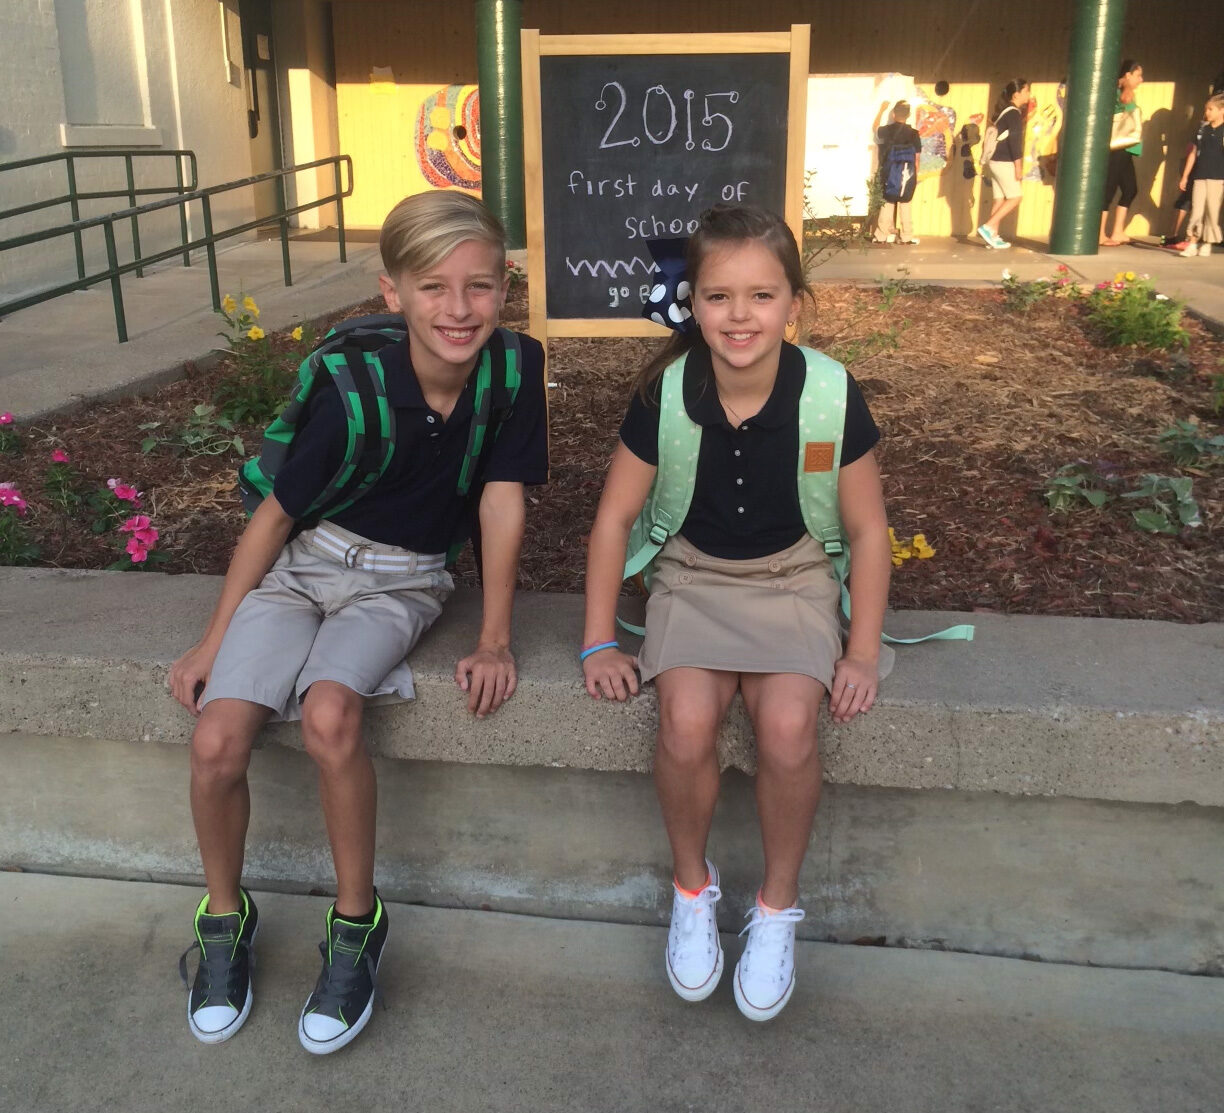 First Day of school at Rosemont 2015